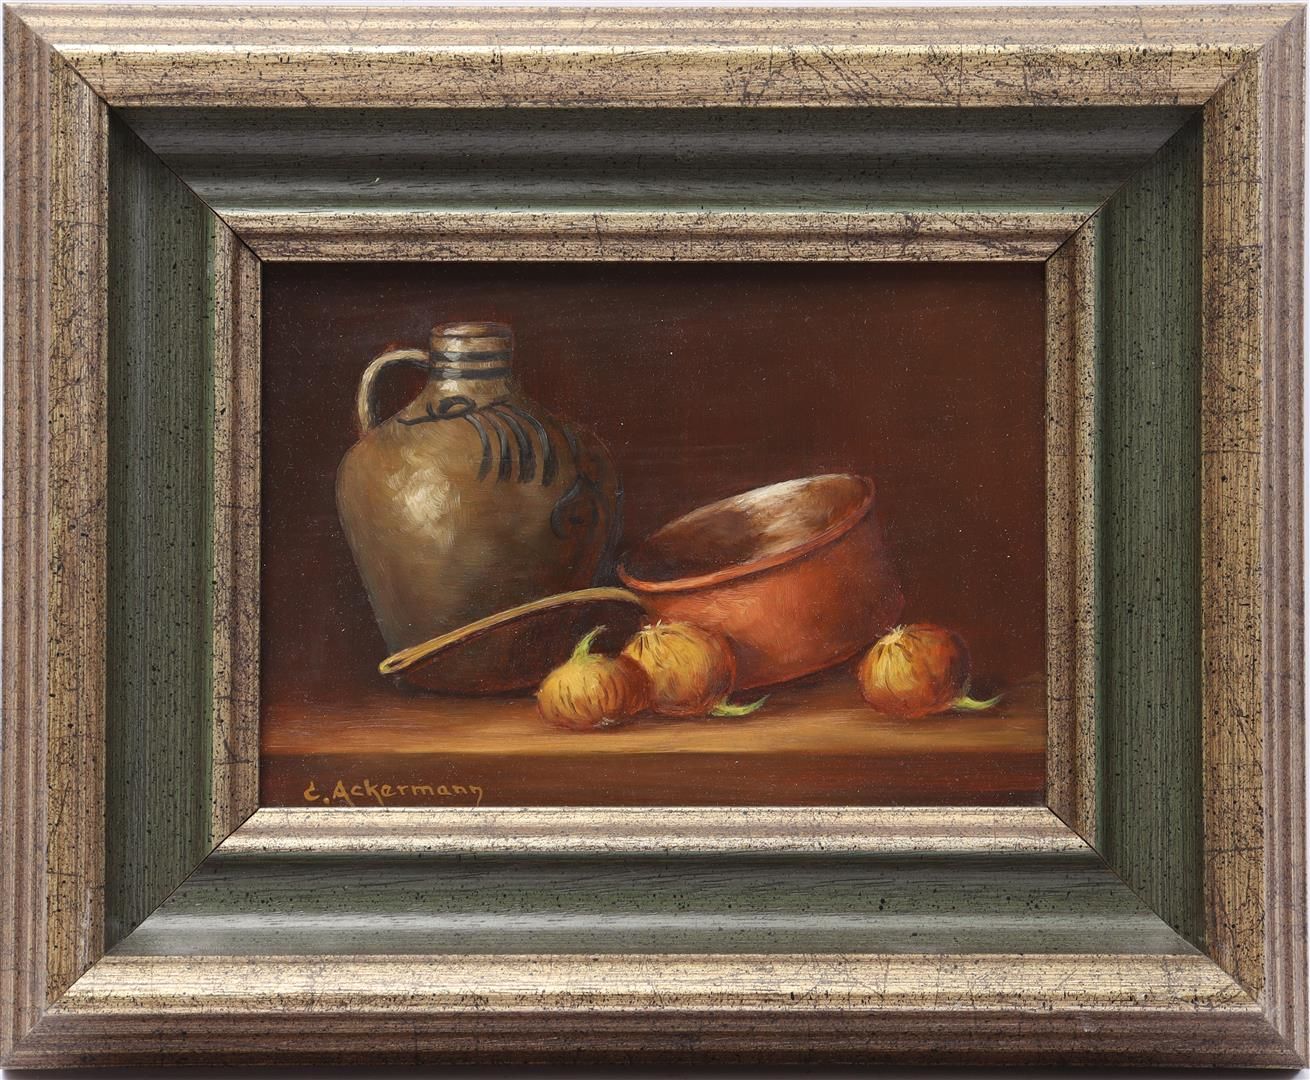 Signed C Ackermann Signed C Ackermann (born 1915), Still life with copper pan, C&hellip;